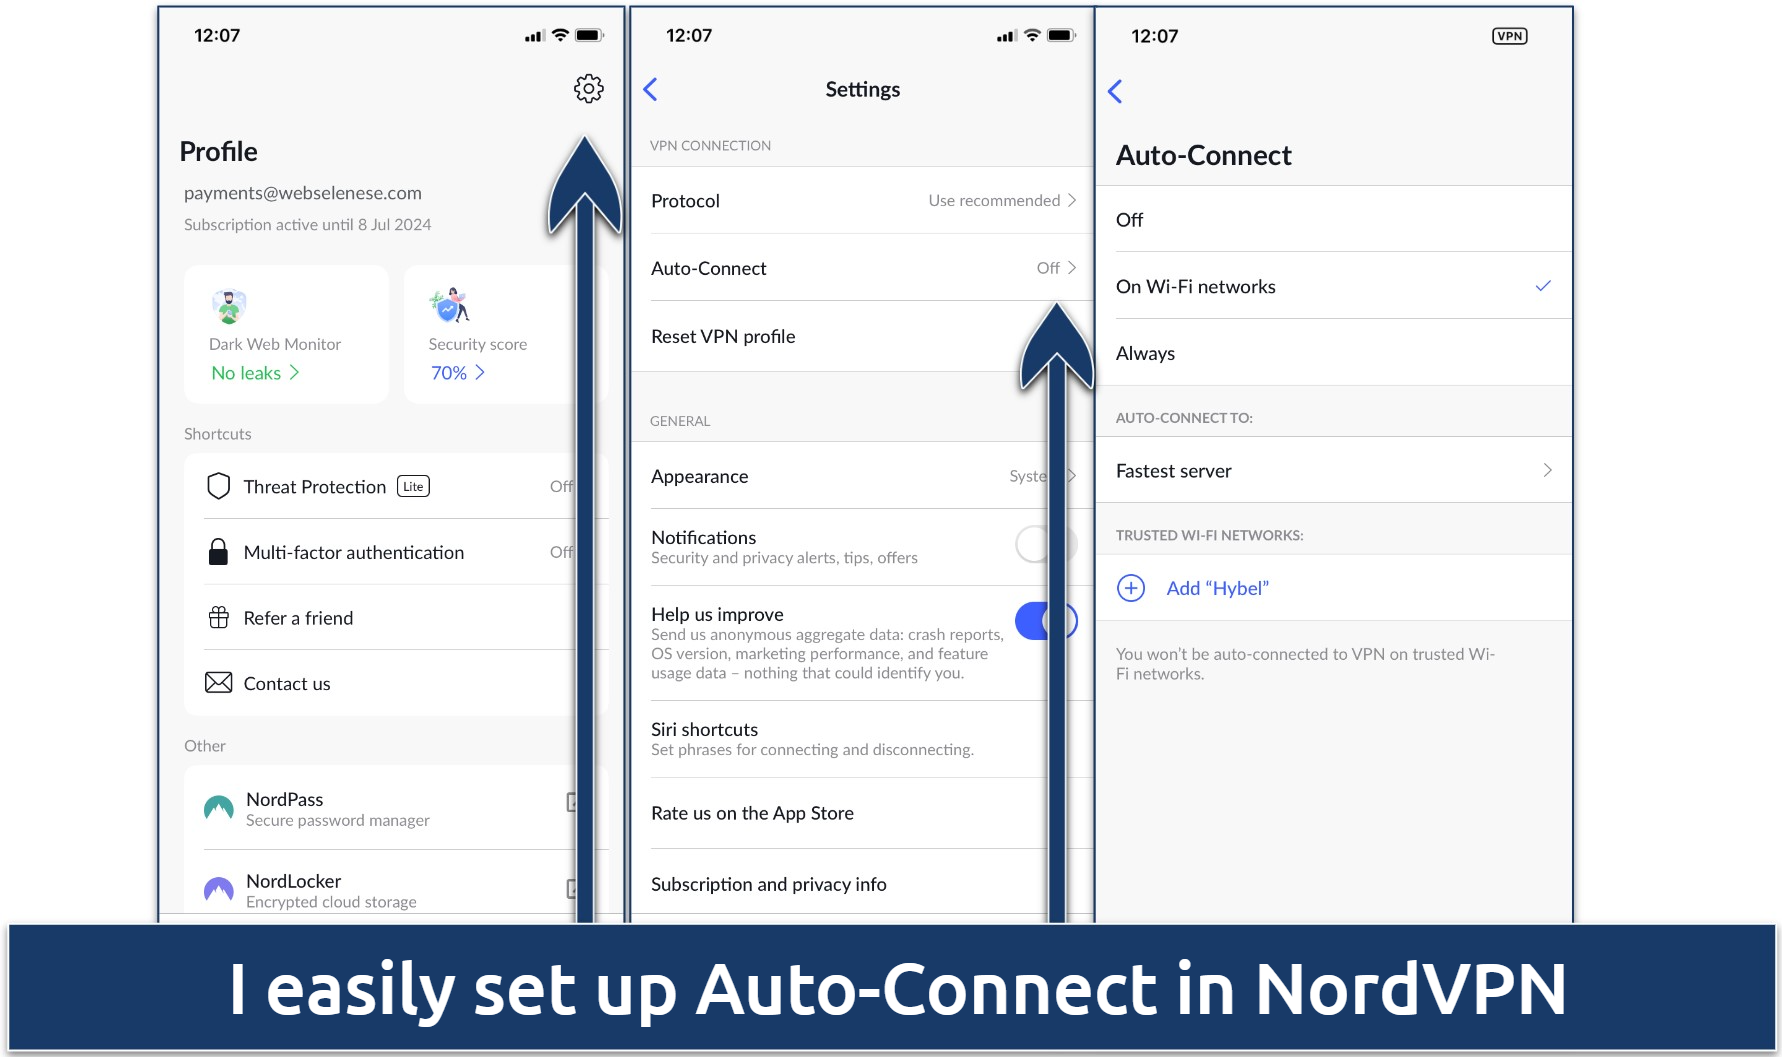 Screenshot of NordVPN's Auto-Connect feature in app's settings